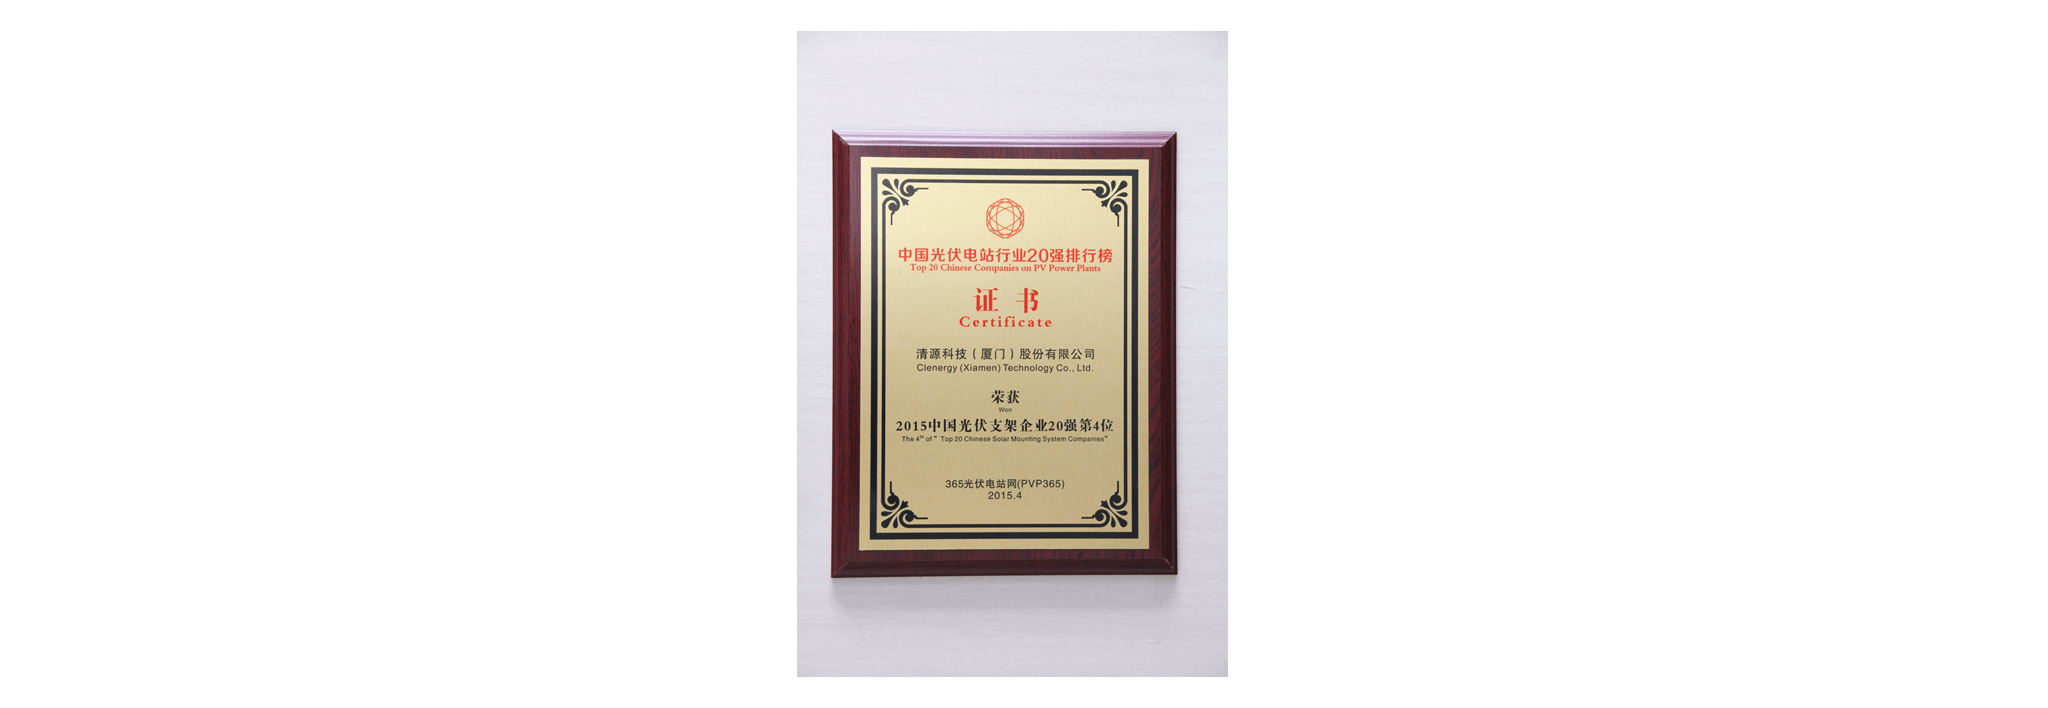 Clenergy Named One of the Top 20 Solar Mounting System Manufacturers in China 2015